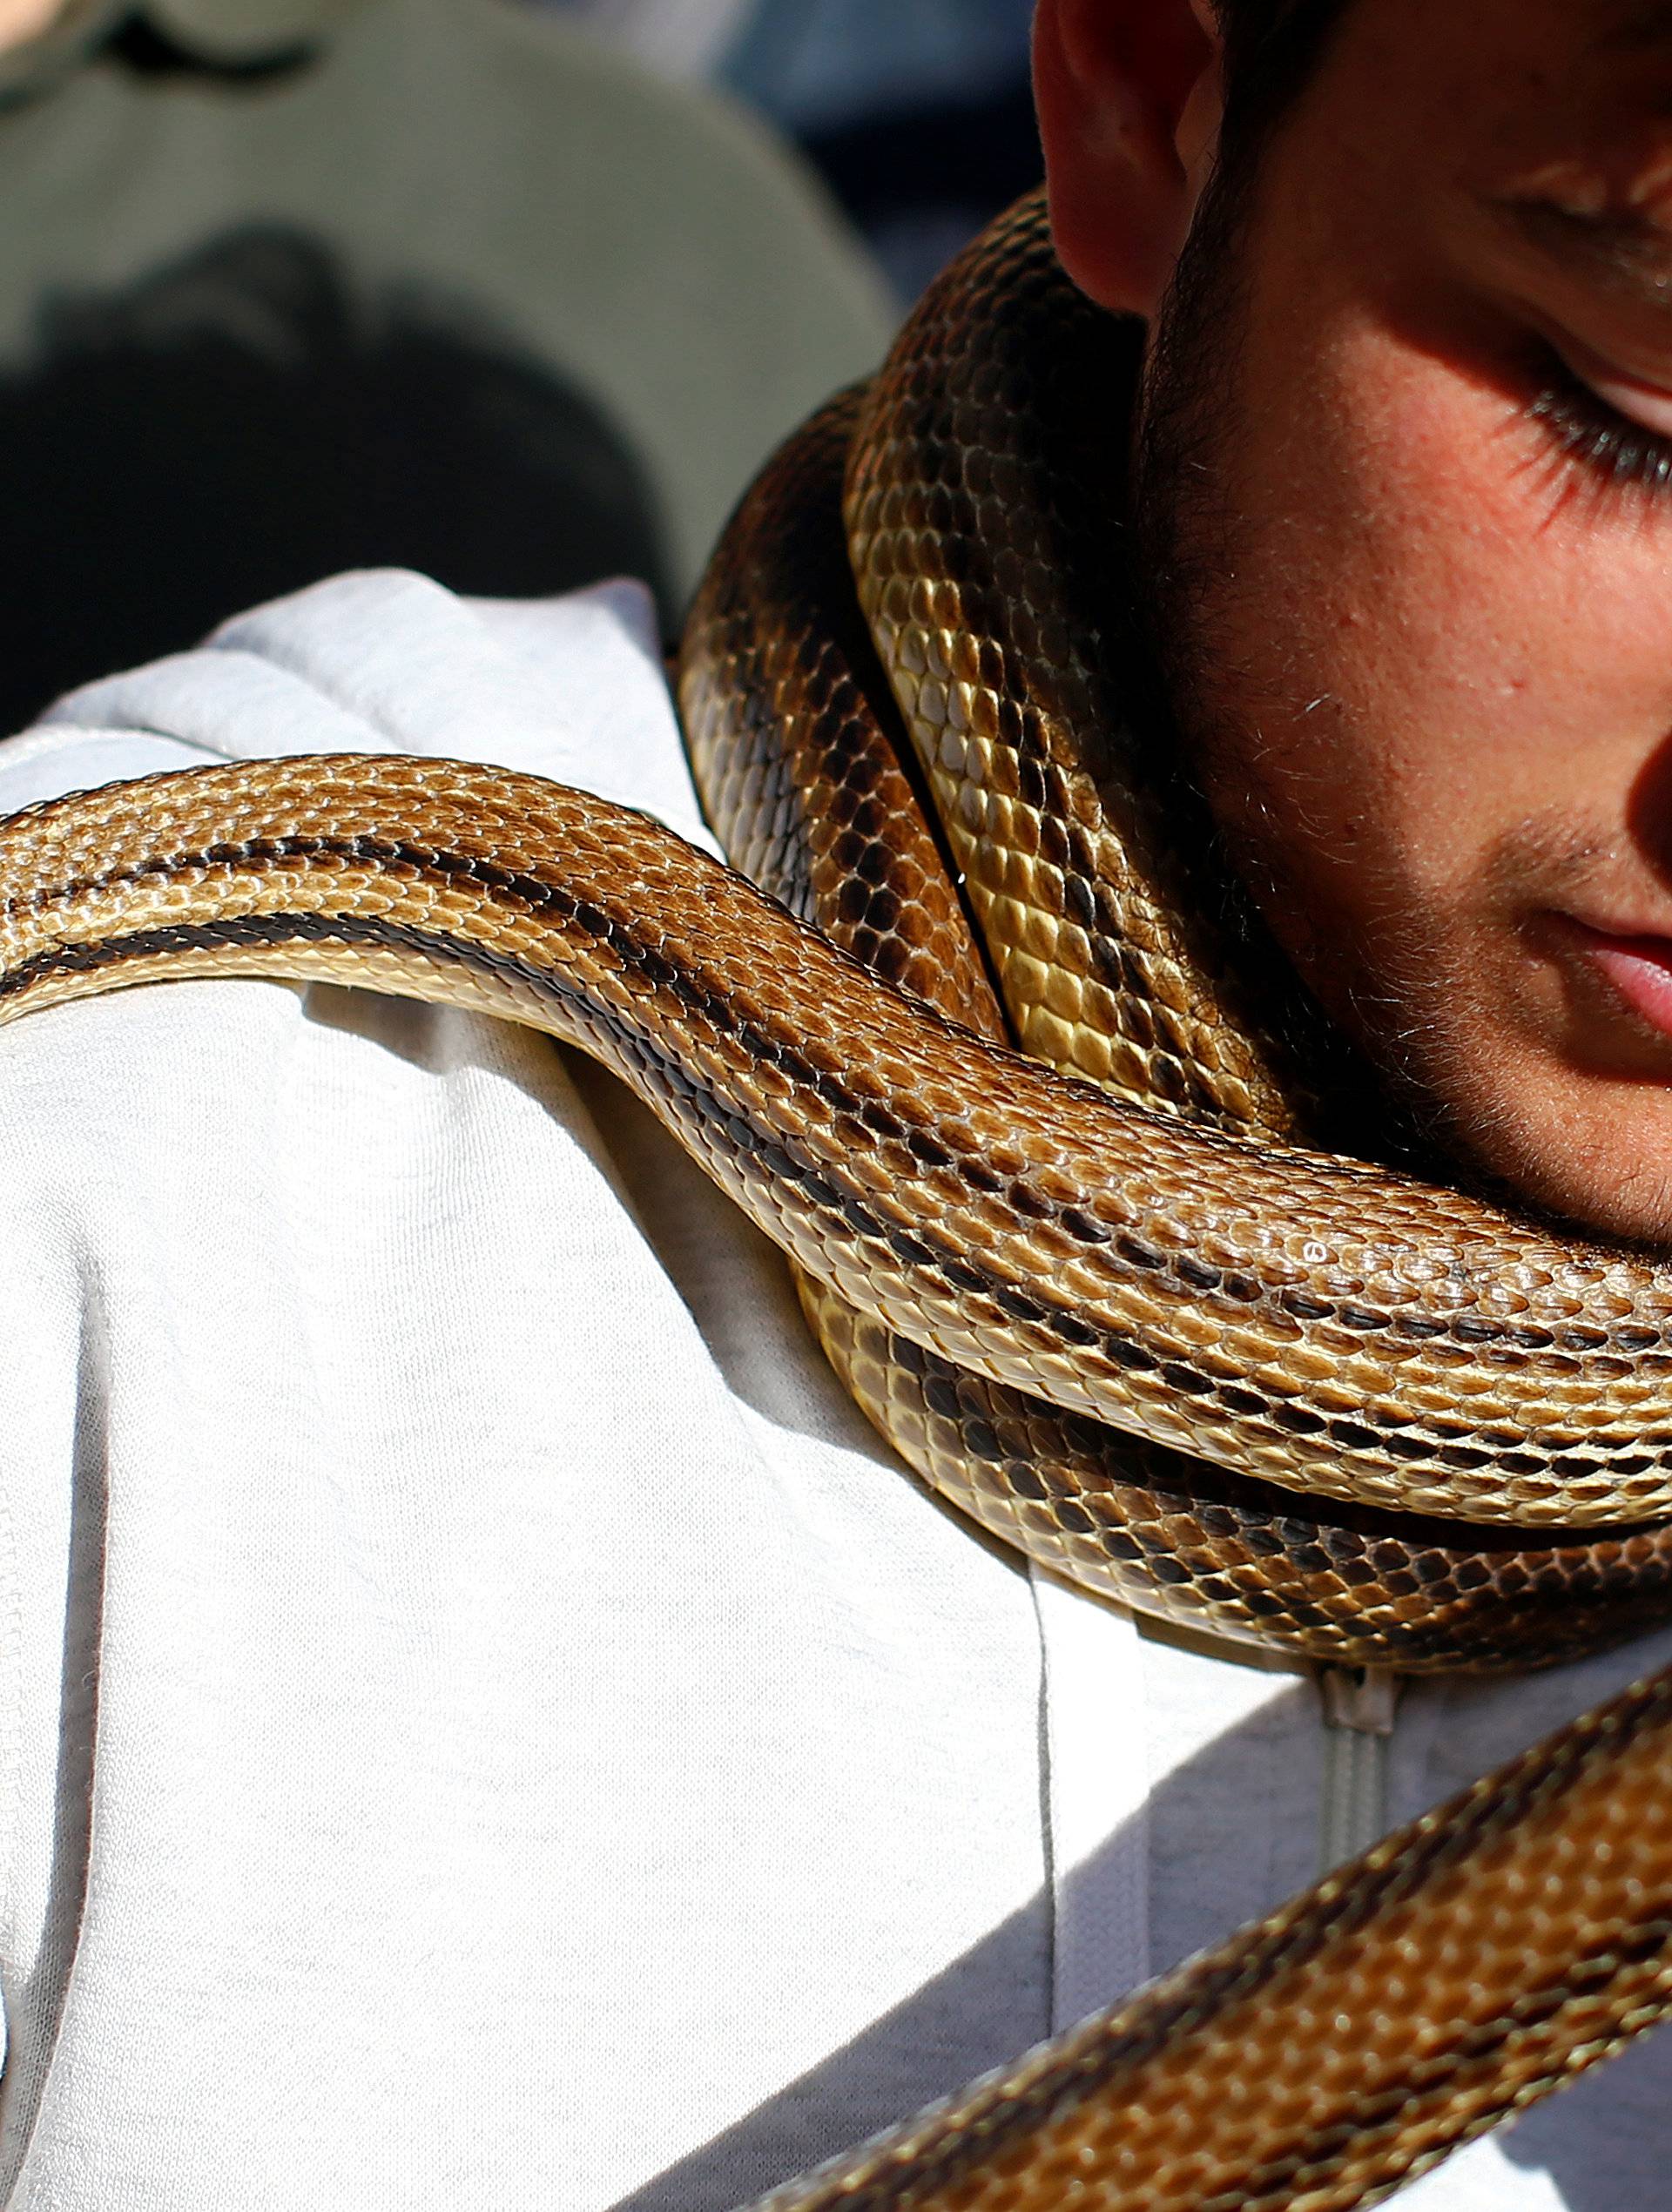 A man holds a snake, used to cover a wooden statue of Saint Domenico, during the St. Domenico procession in Cocullo